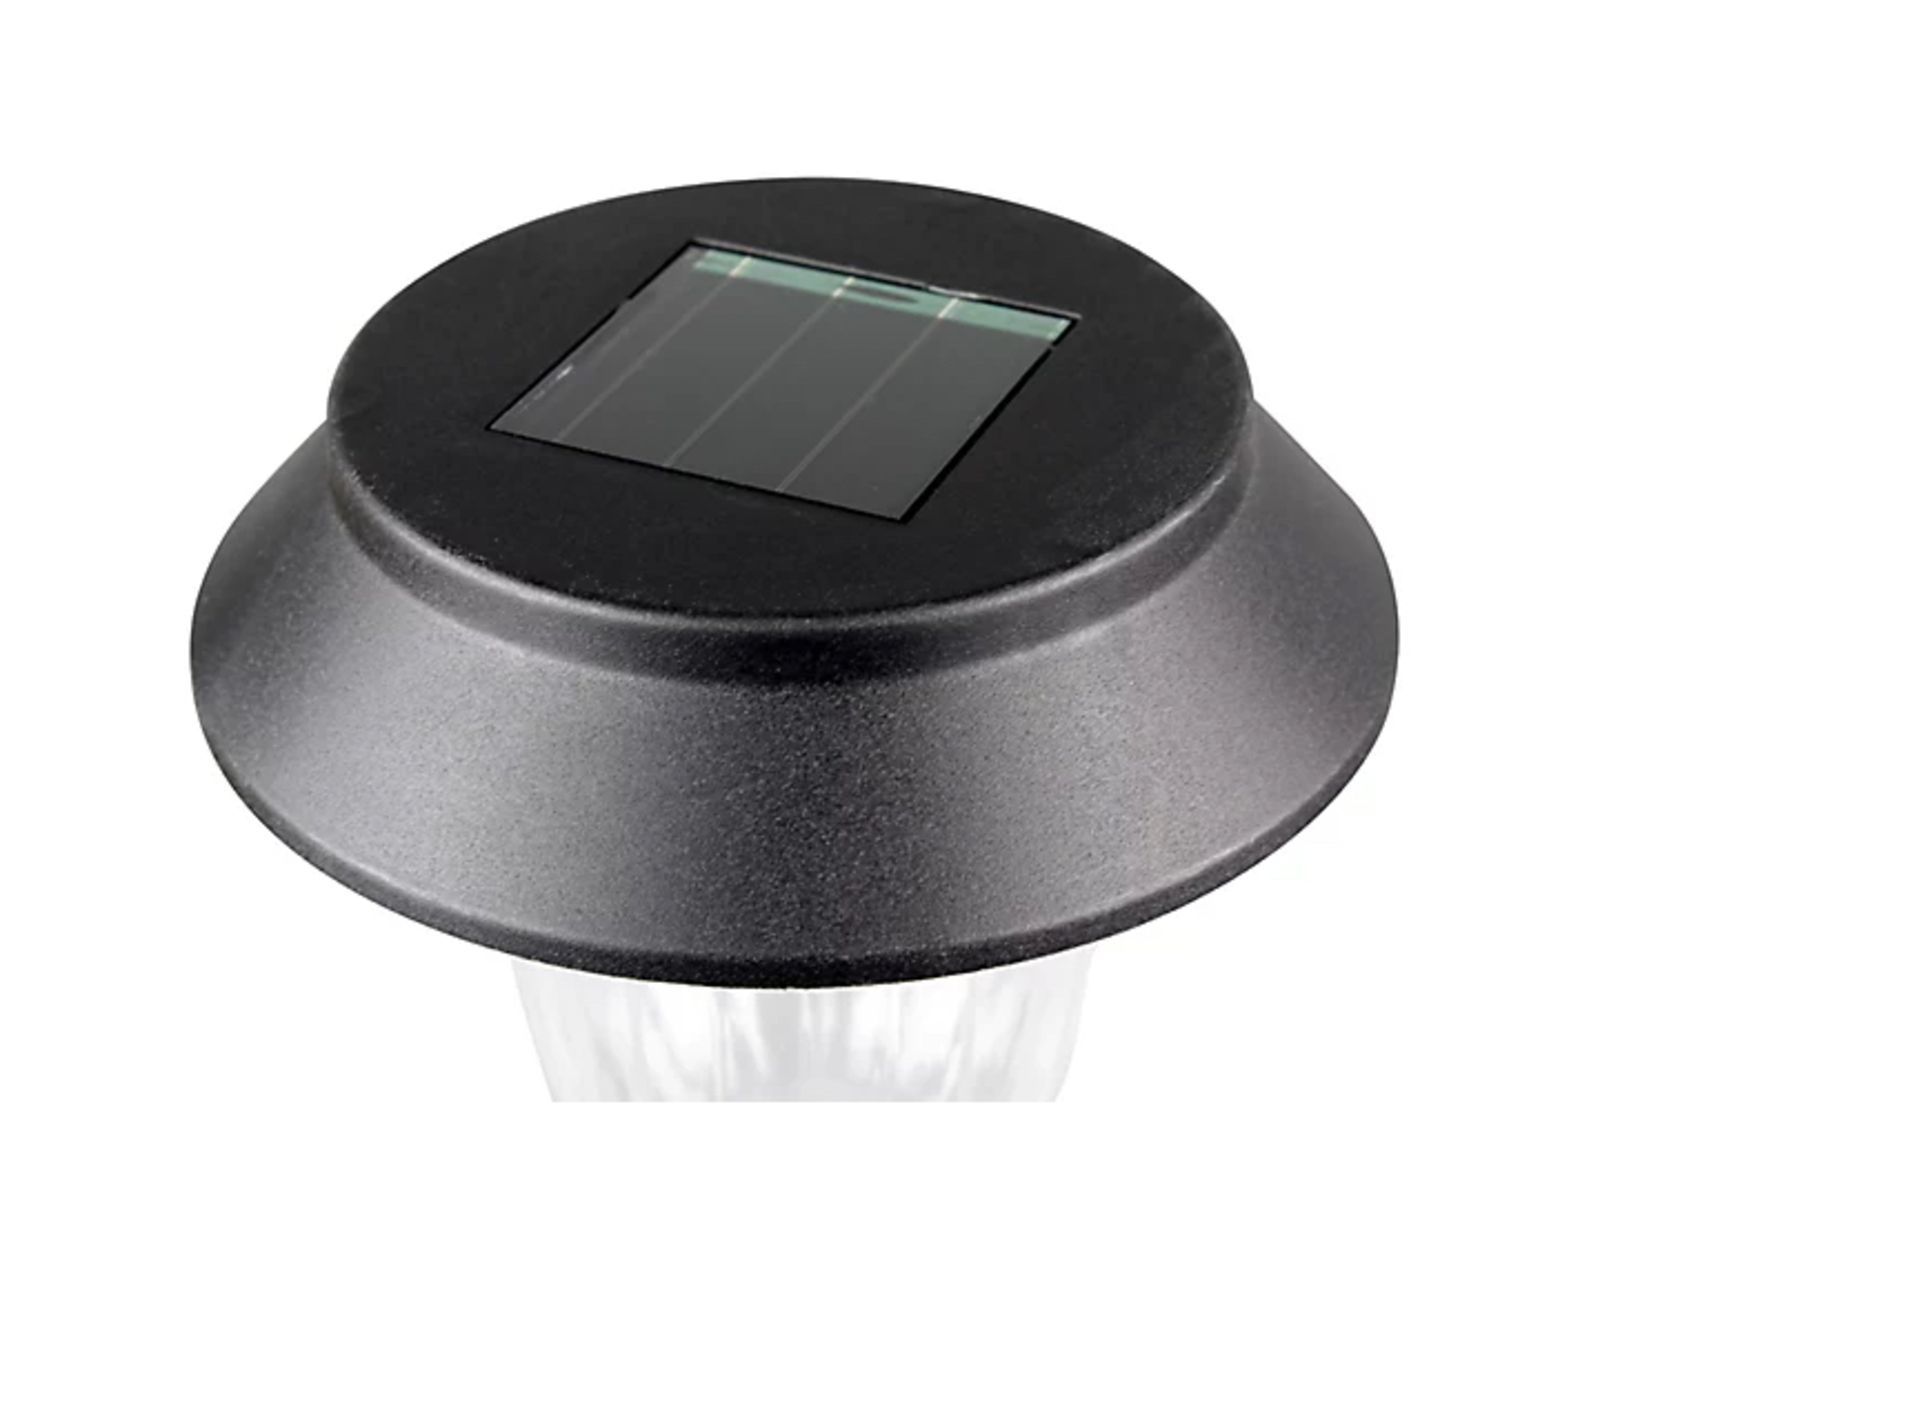 4x New Black Solar-Powered Integrated LED Outdoor Stake Light - Image 4 of 6